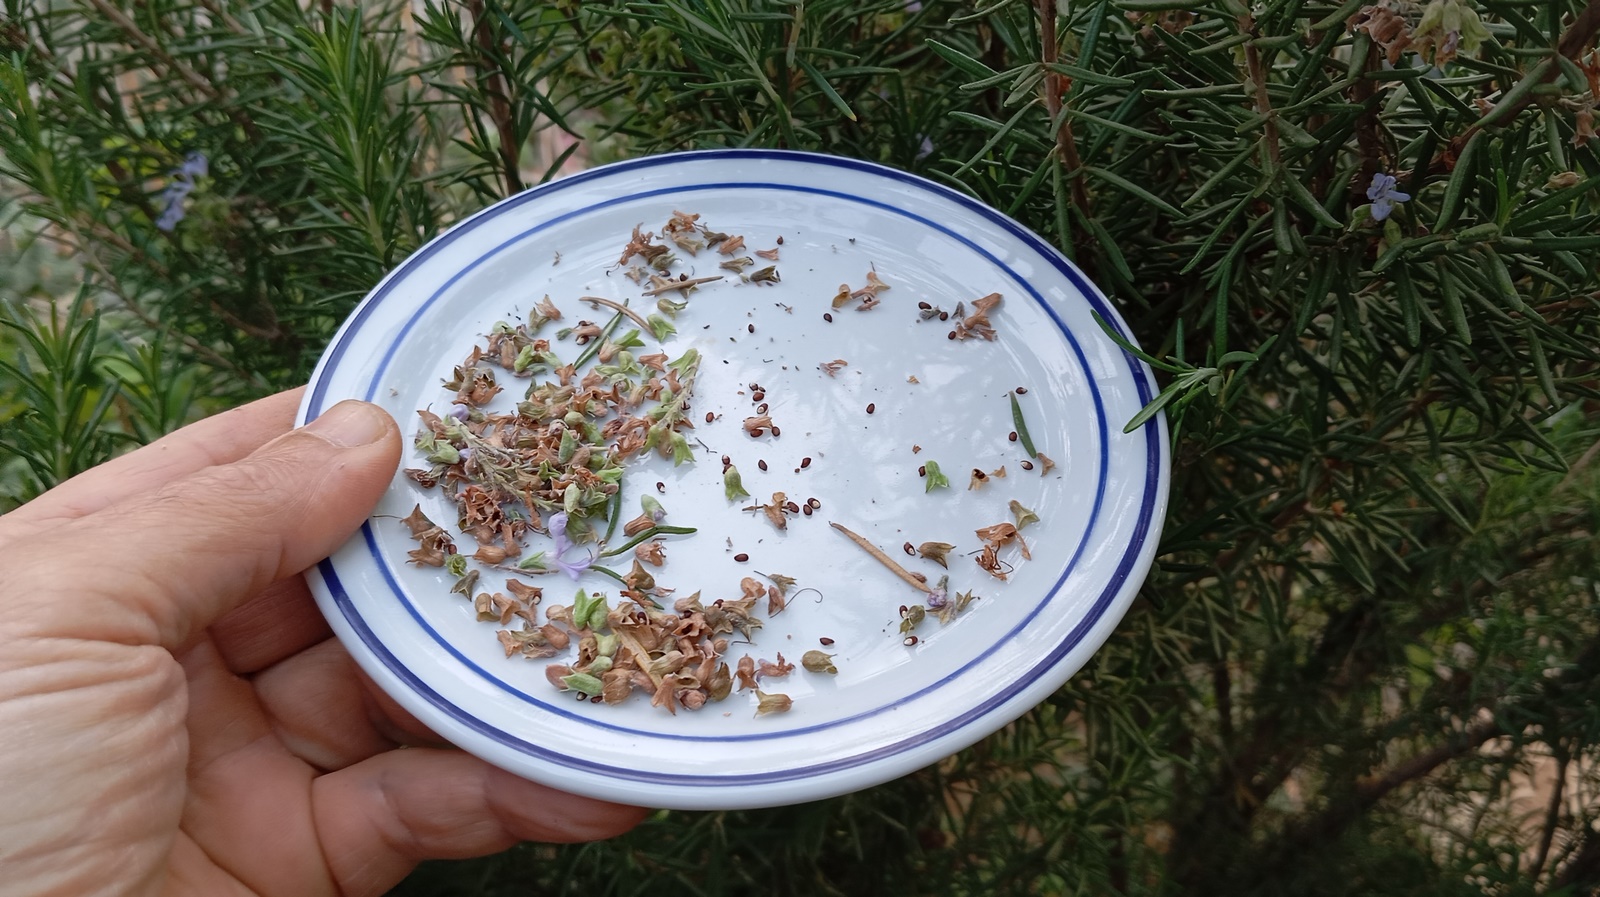 Rosemary seeds are small, elongated, and typically dark brown to black in color. They have a somewhat oblong shape, often resembling tiny grains or specks. These seeds are the starting point for growing rosemary plants